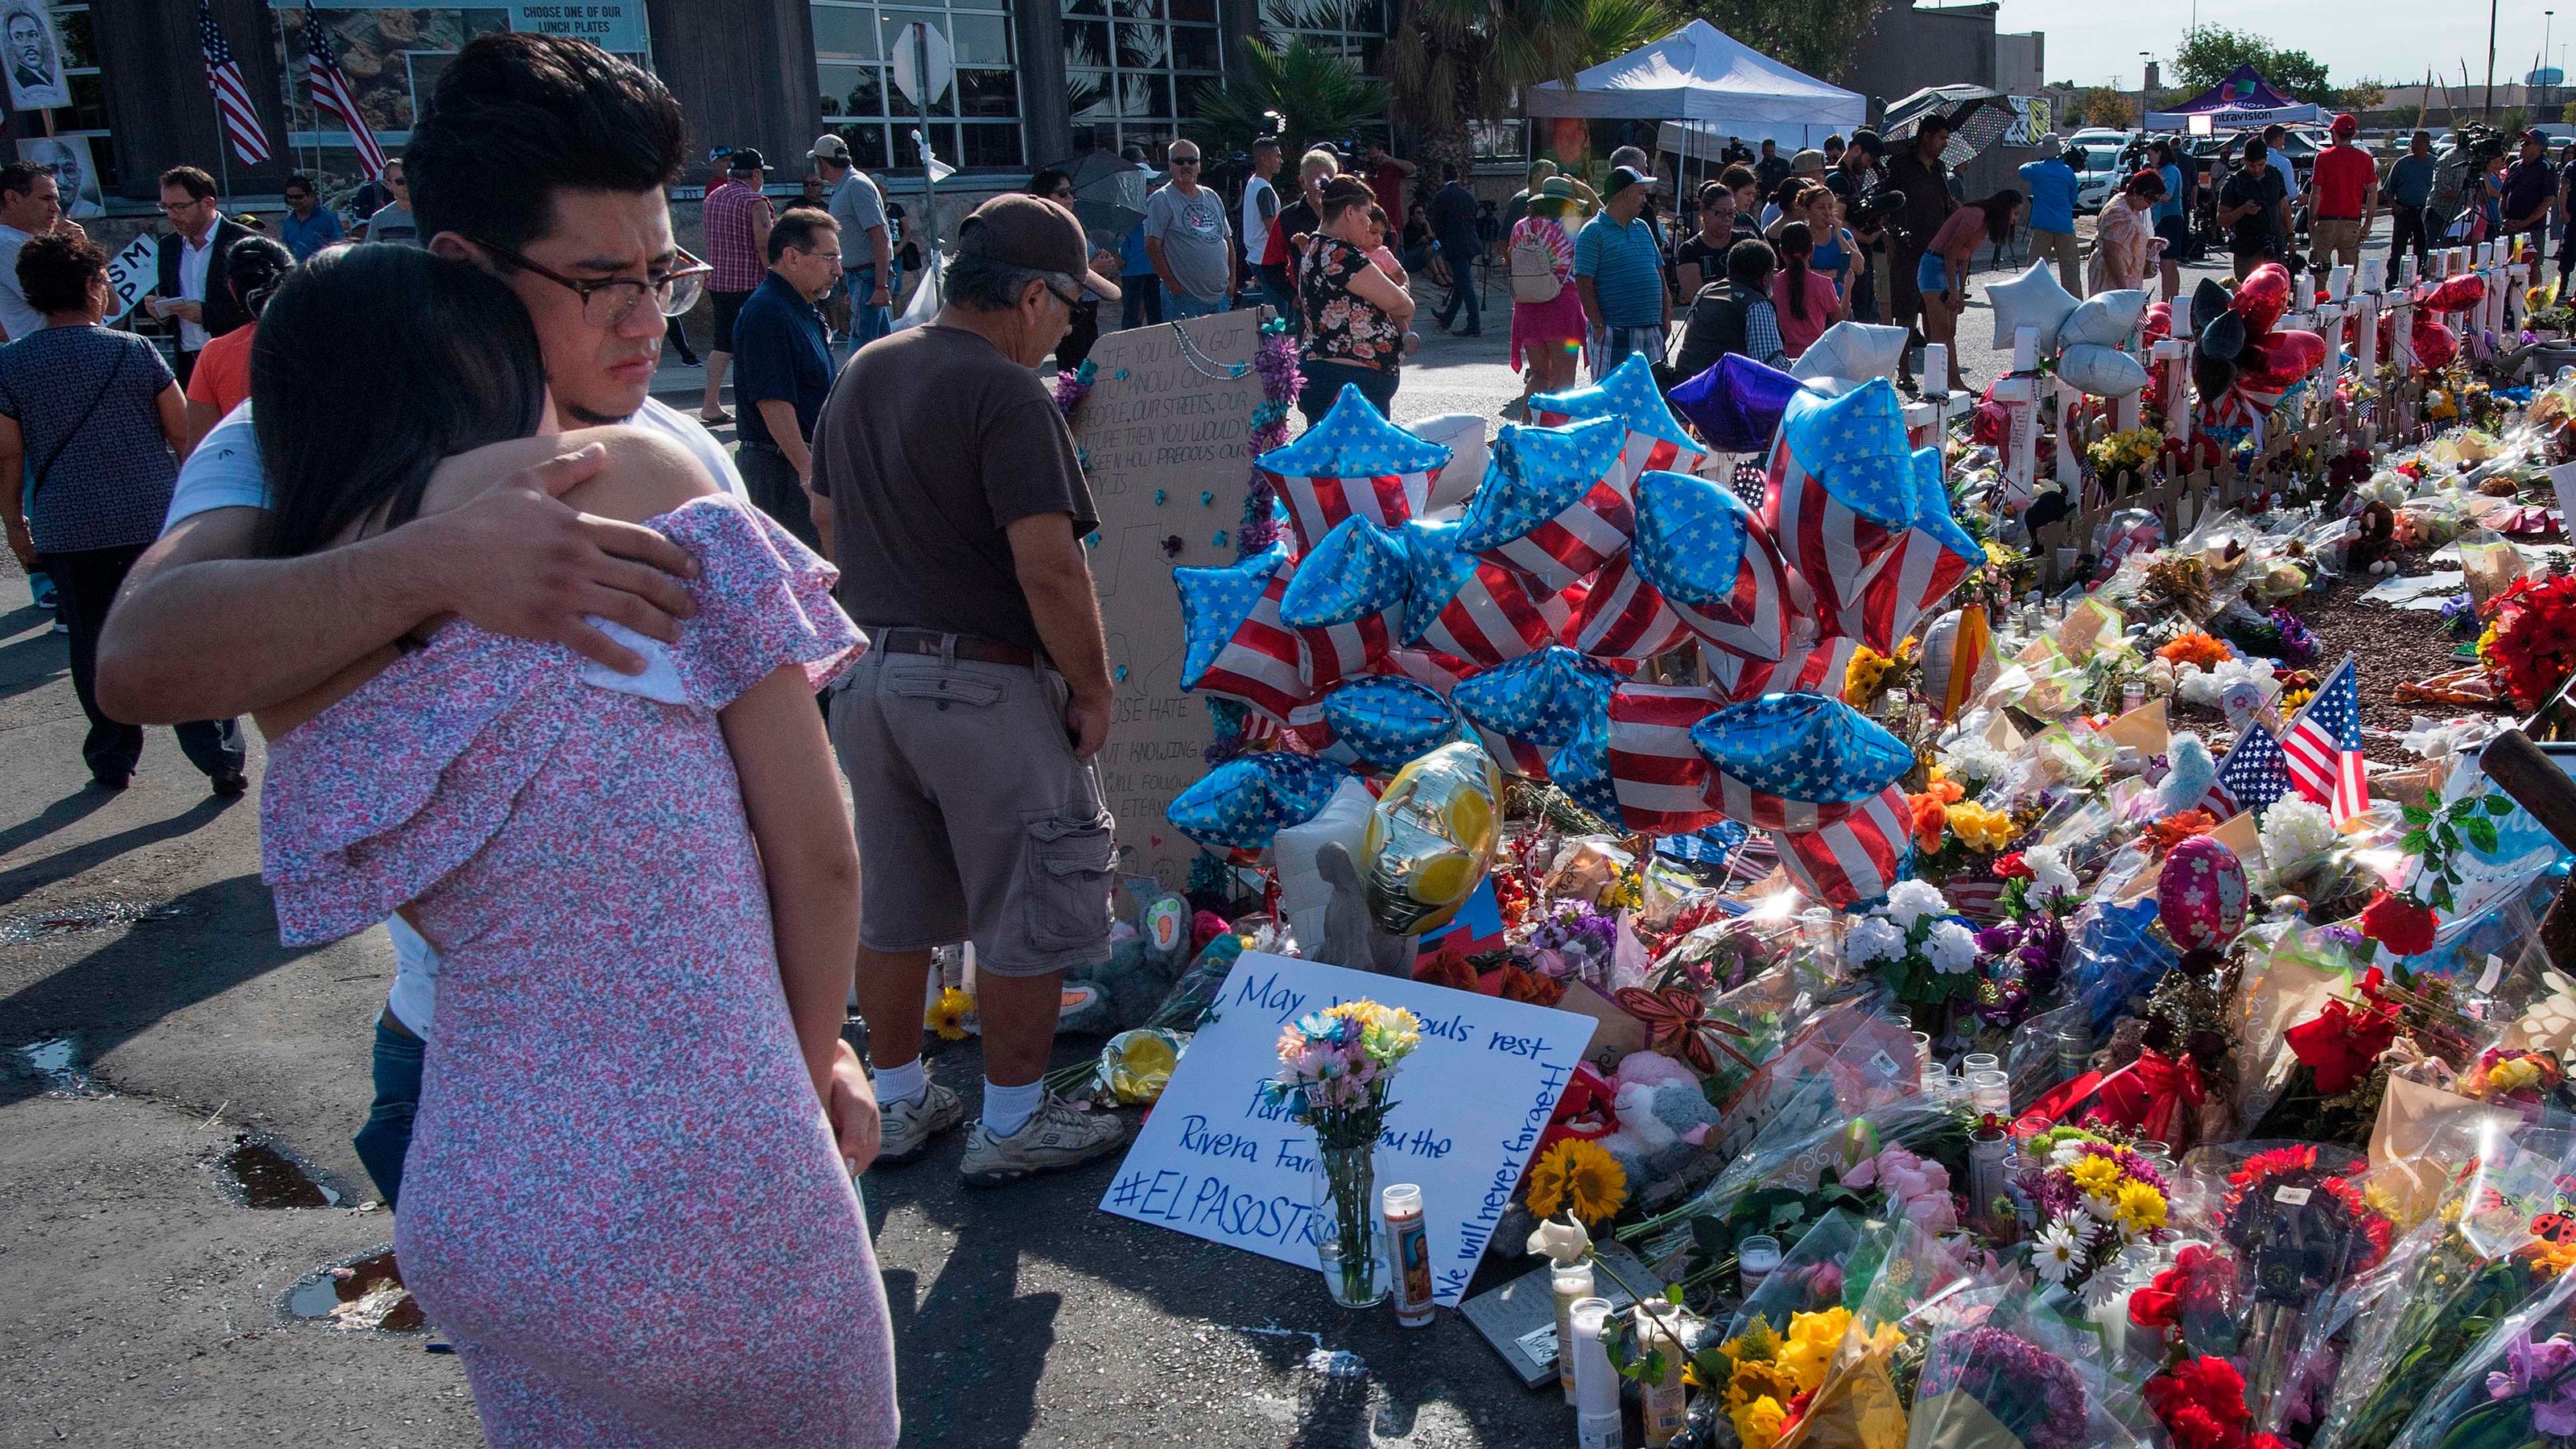 Mass shootings not caused by mental illness, experts say